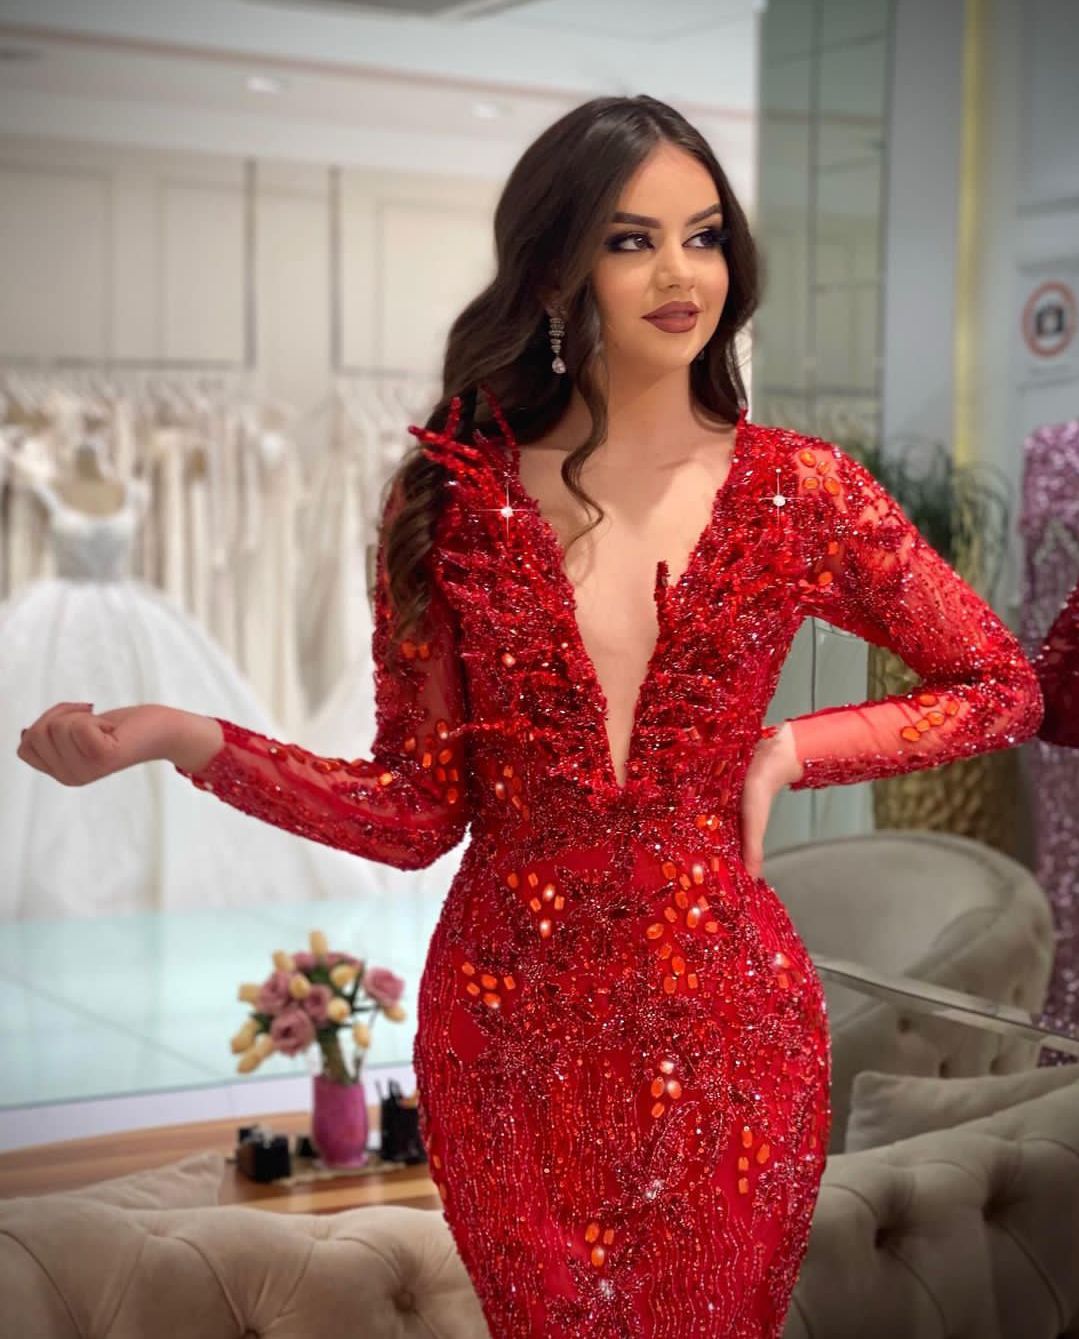 Red Mermaid Prom Dresses Long Sleeves V Neck Appliques Sequins Beaded Floor Length Diamonds 3D Lace Sparkly Zipper Evening Dress Bridal Gowns Plus Size Custom Made